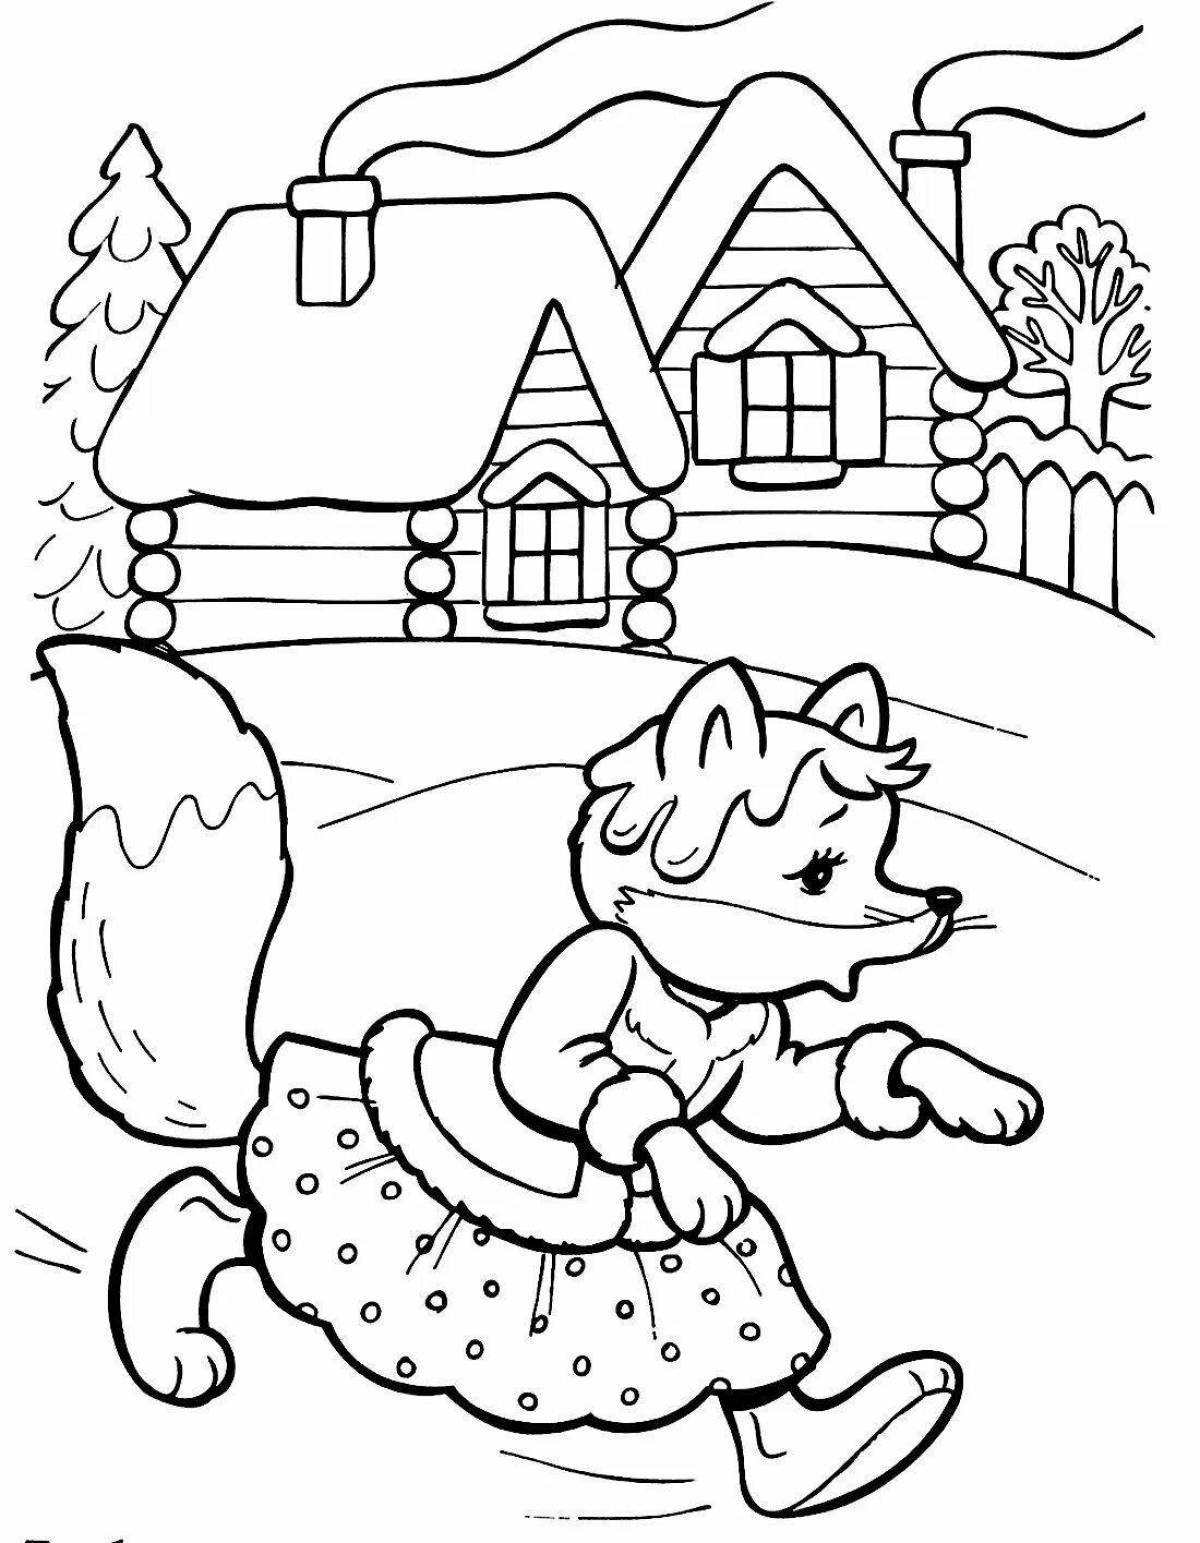 Rustic hut coloring page